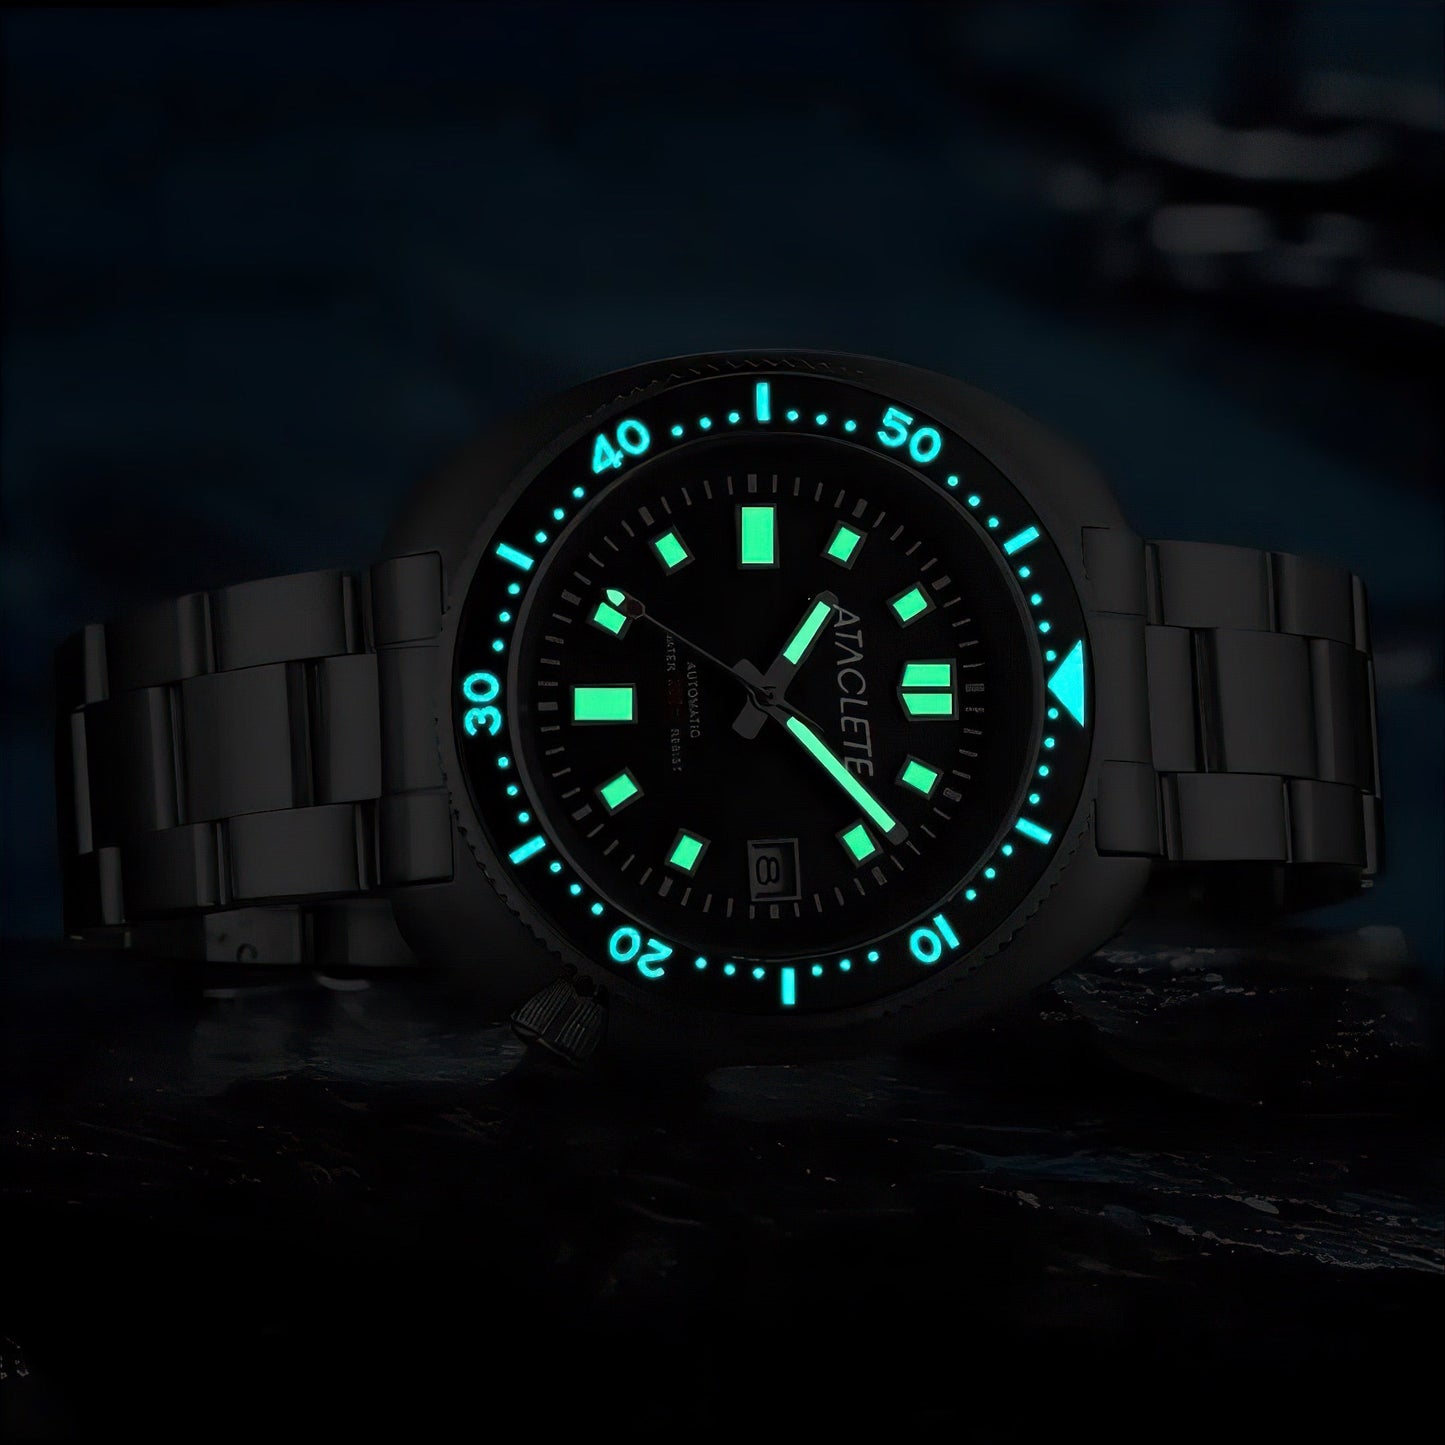 "The Professional" Men's Dive Watch NH35 tech -200 Meter Depth  we by ATACLETE